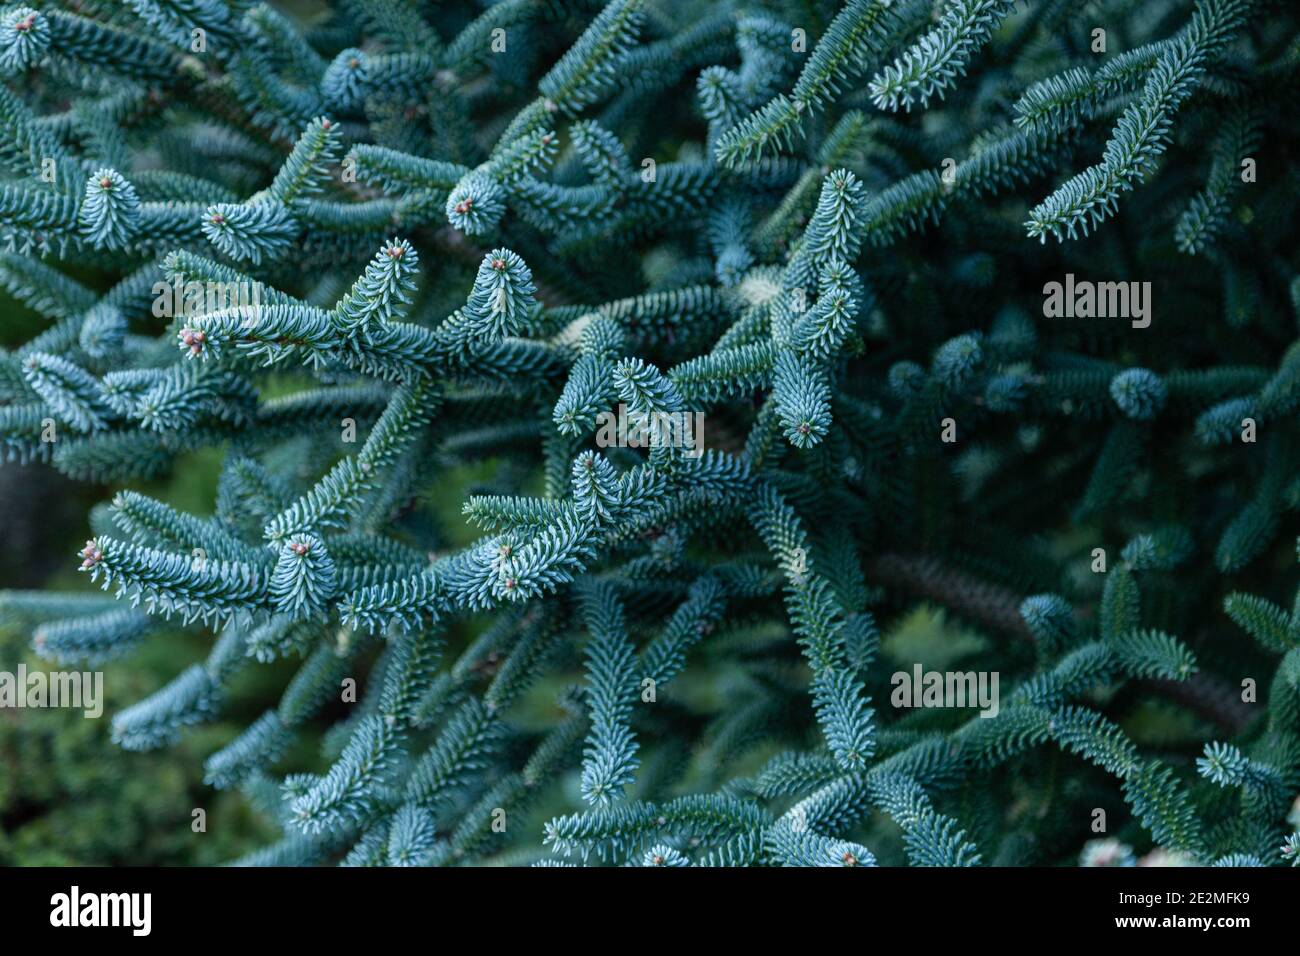 Blue Spanish Fir tree close up. (Abies Pinsapo Glauca). The pine needles are a blue/green colour with red flowers just starting to form at the tips. Stock Photo